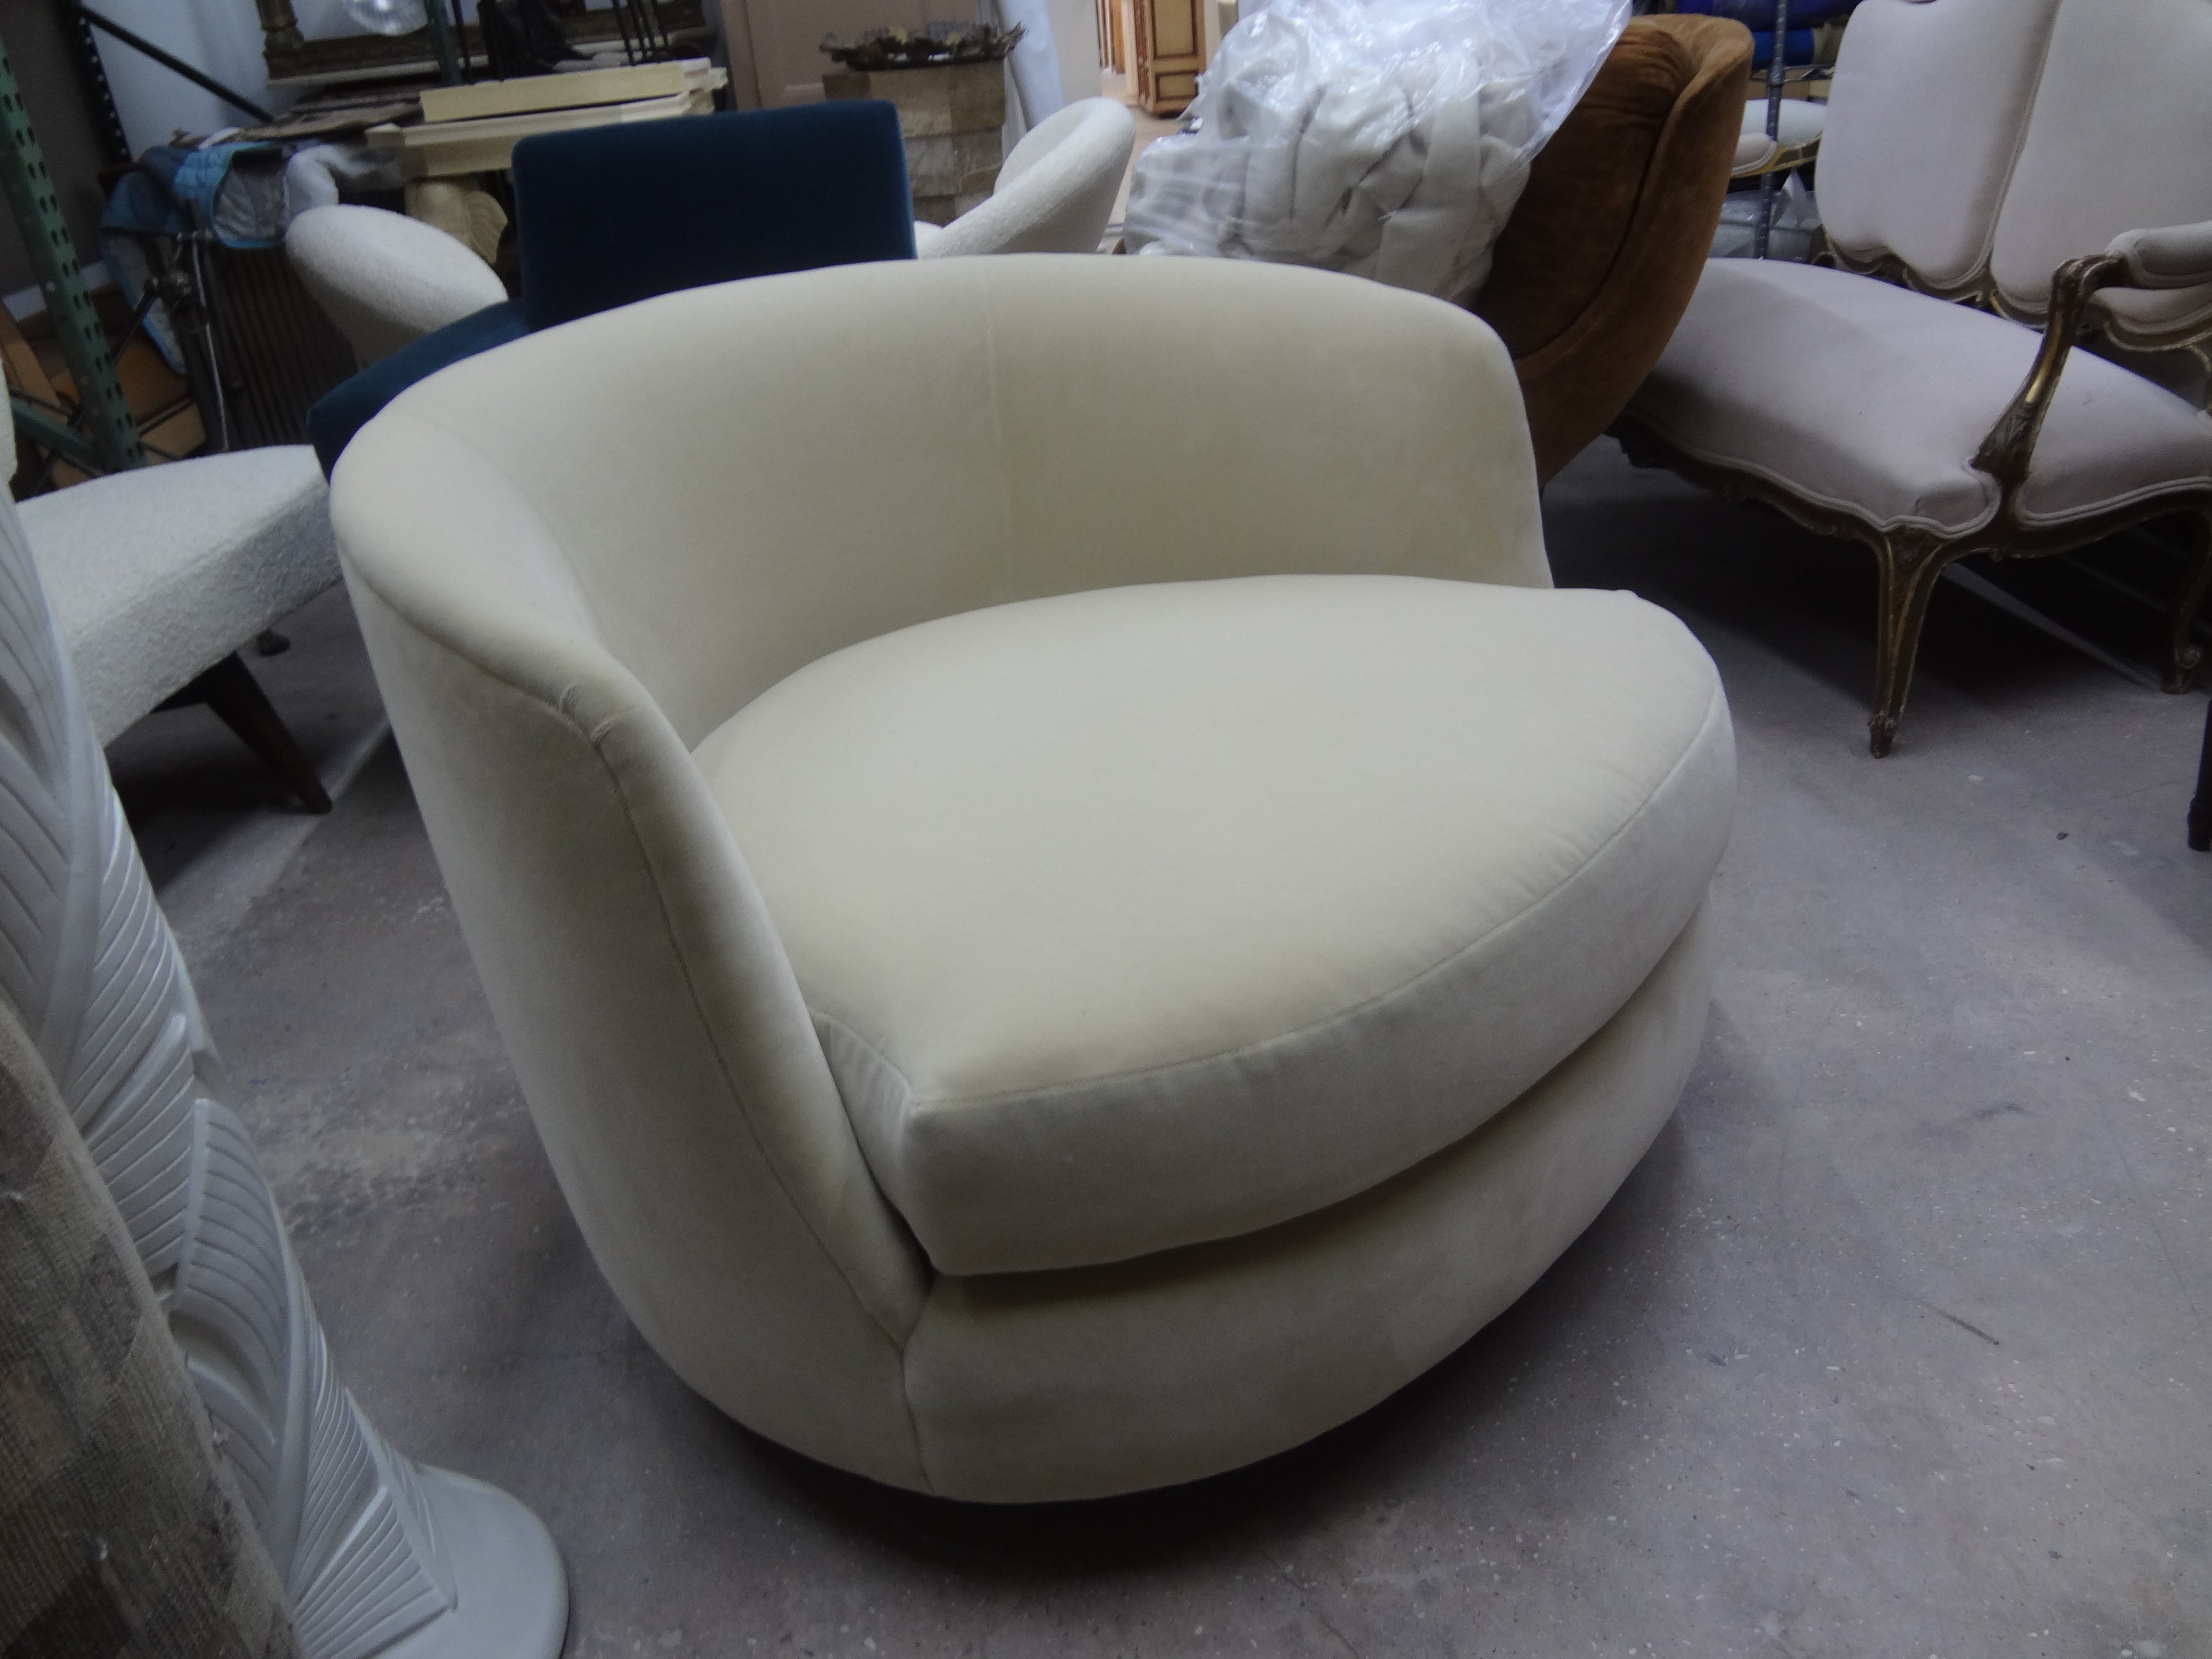 Circular Milo Baughman for Thayer Coggin swivel lounge chair. This Gorgeous Milo Baughman oversized circular swivel lounge chair has been newly upholstered in a cream colored short pile mohair type fabric. Comfortable and stunning from every angle!